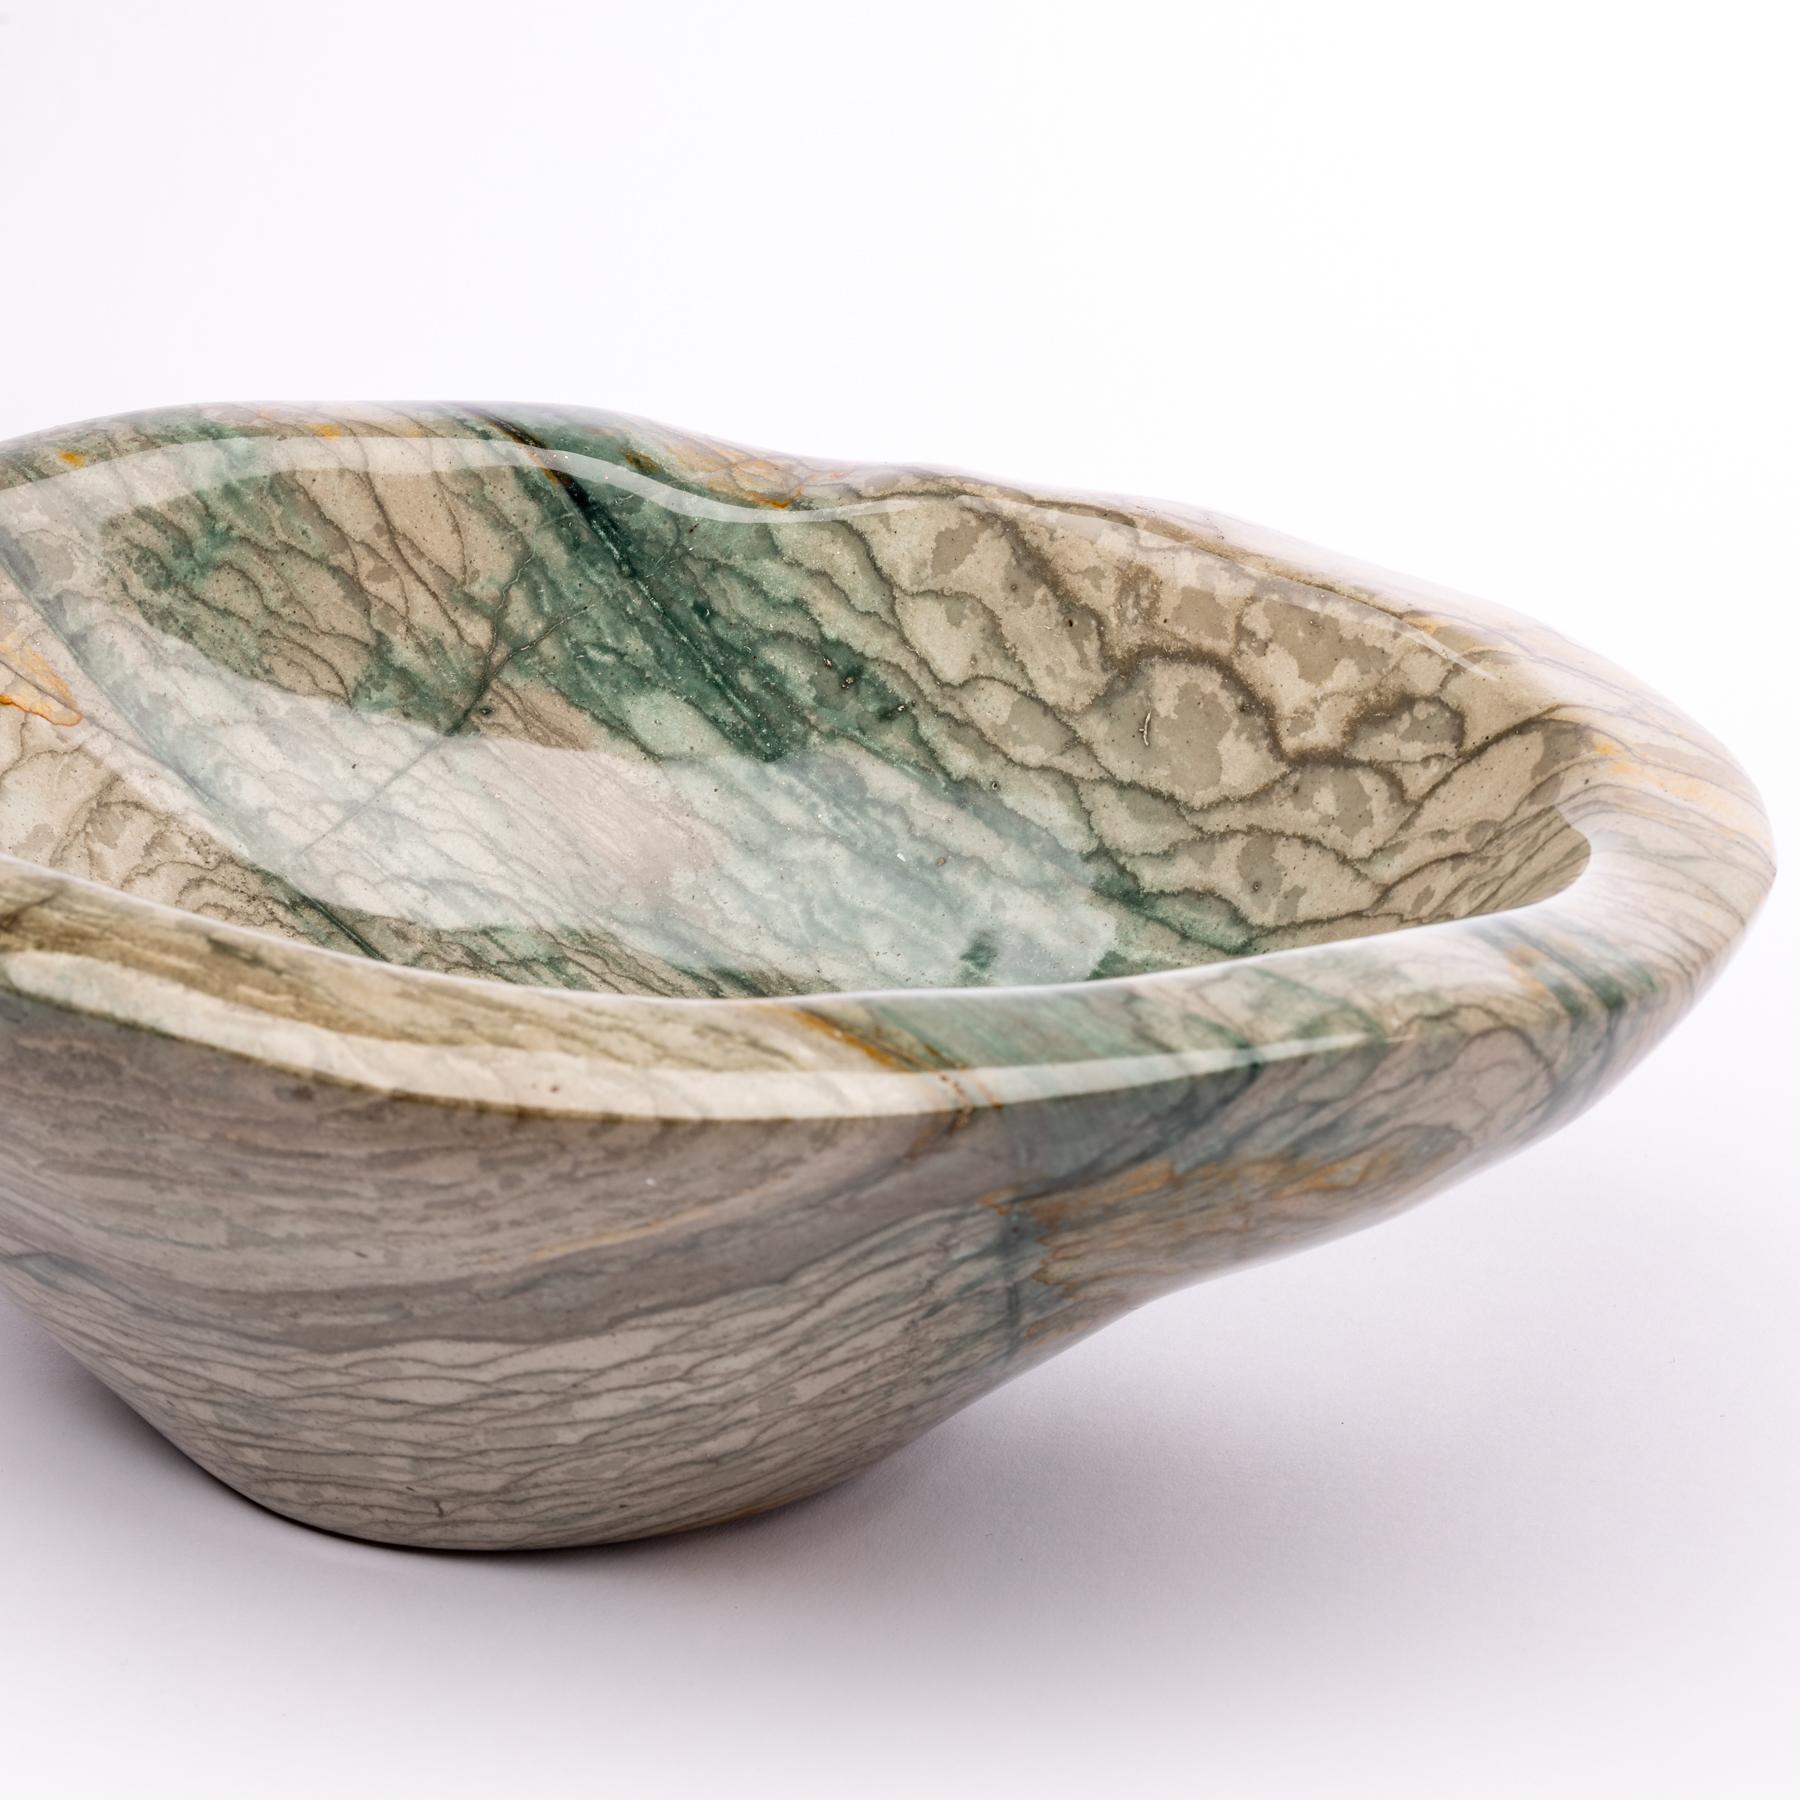 Polished Large Green and White Shade Jasper Handcrafted Bowl from Madagascar